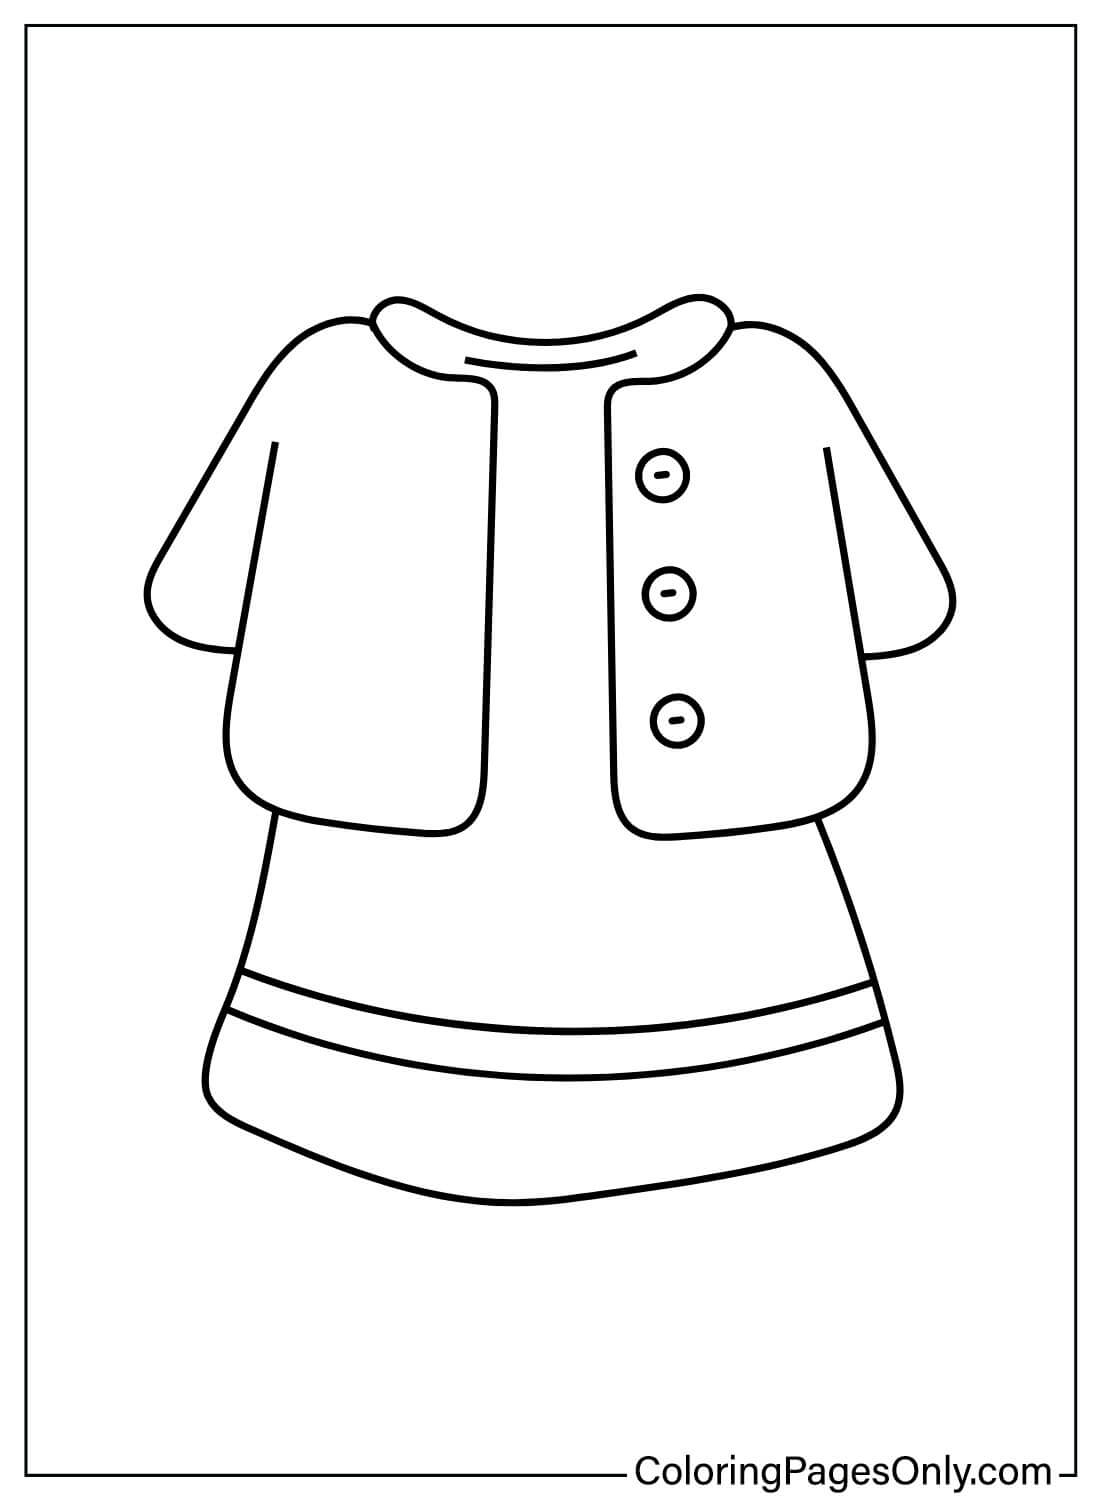 Baby Clothes Coloring Pages - Free Printable Coloring Pages